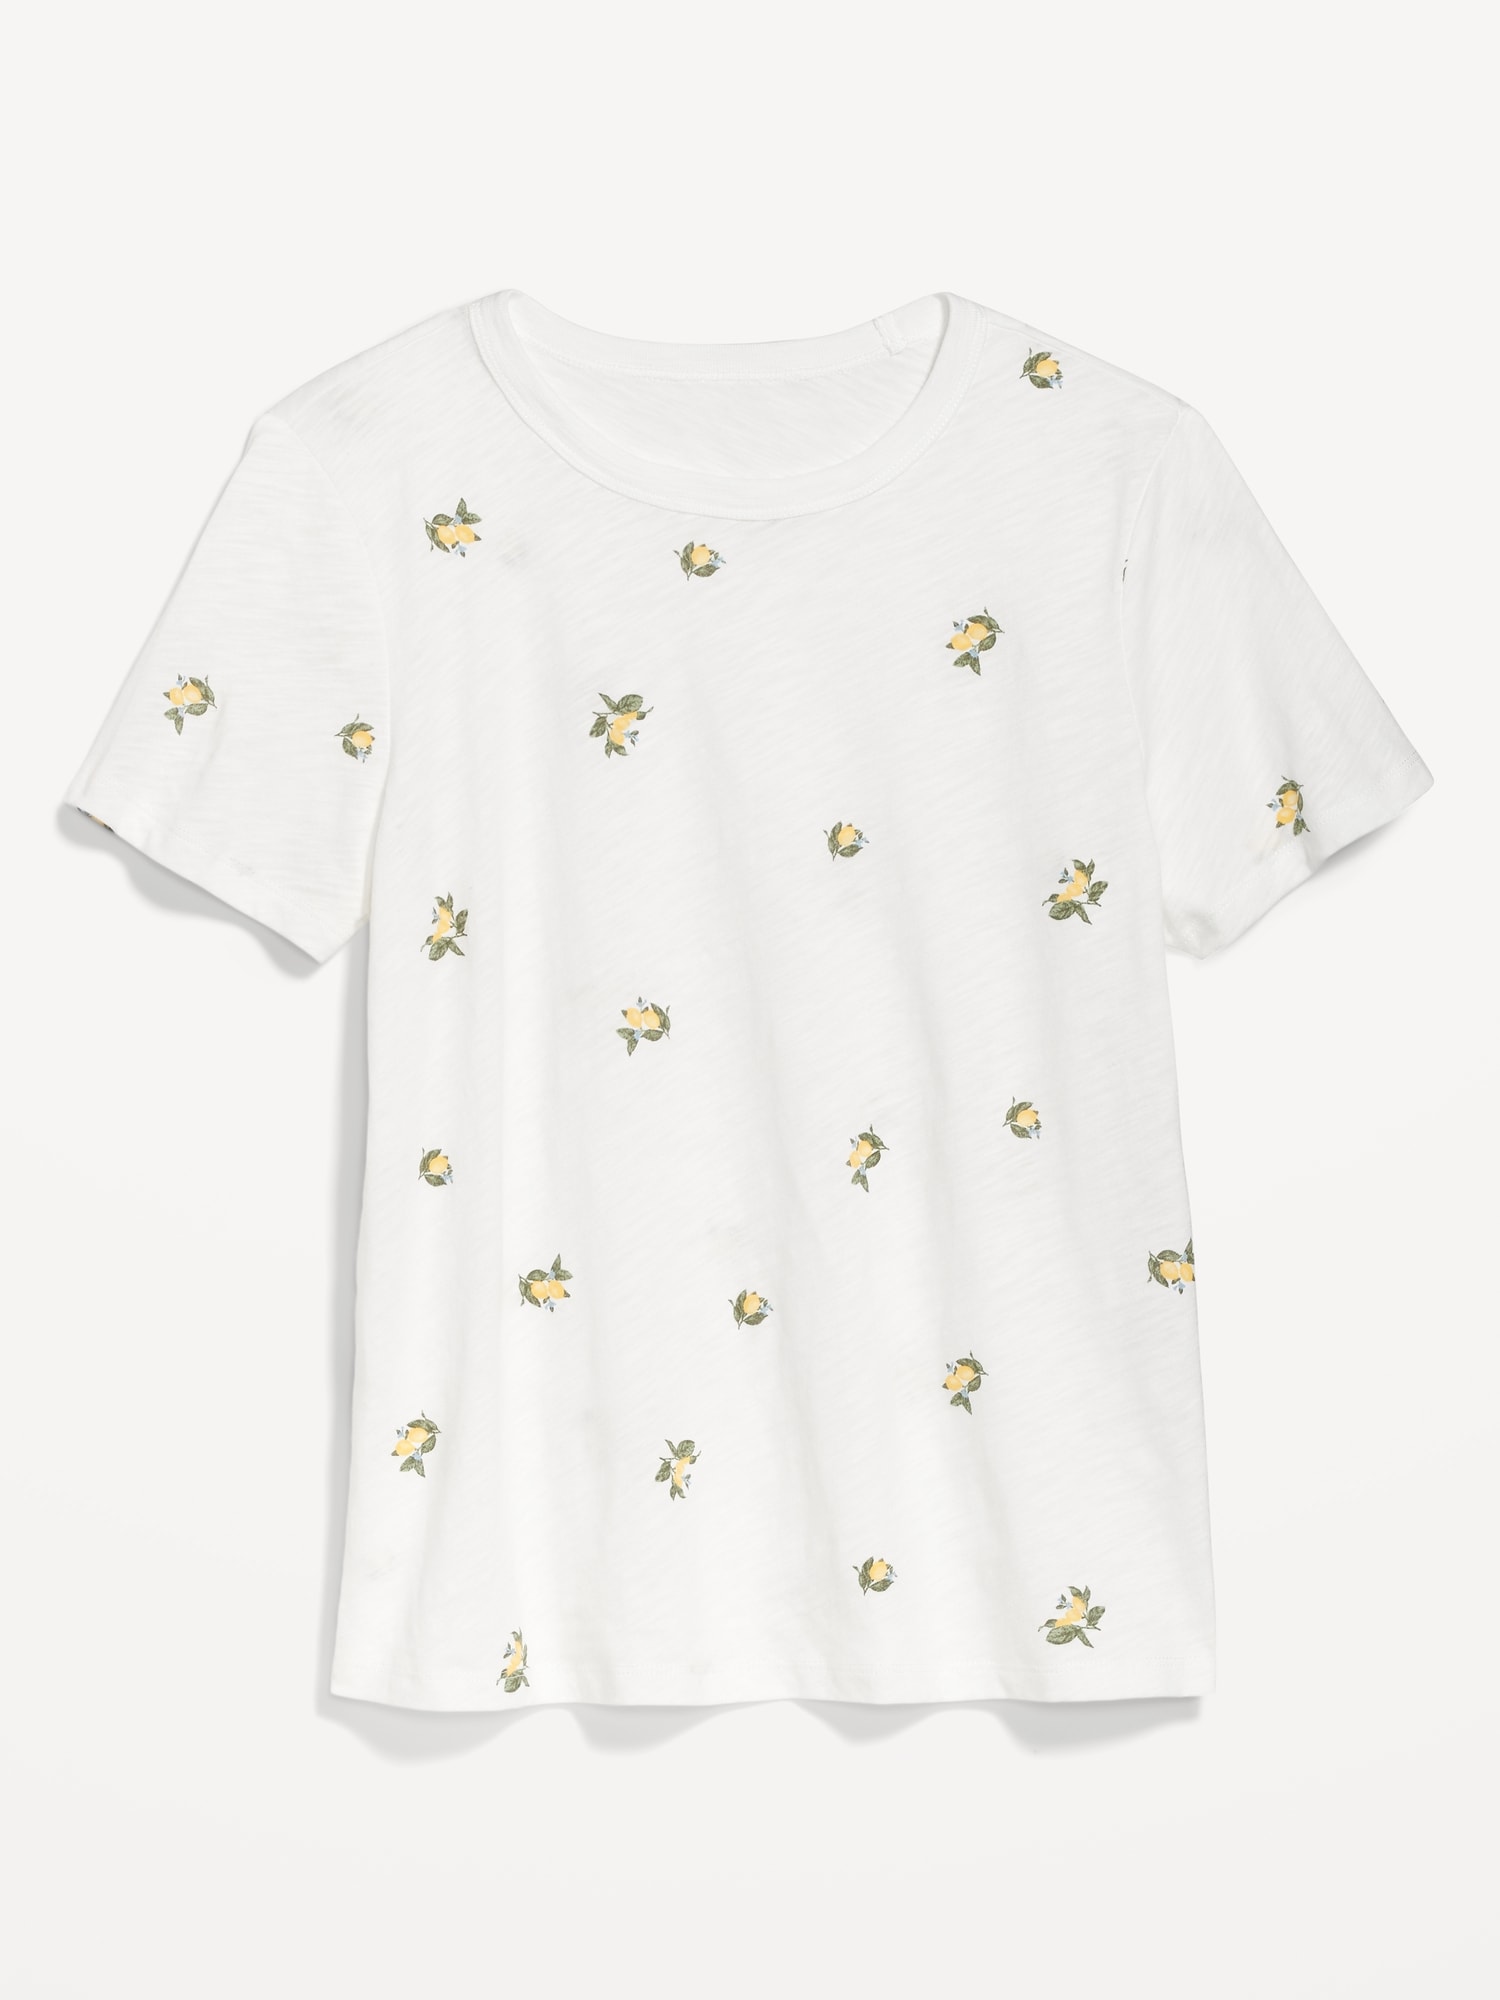 everywear-crew-neck-printed-t-shirt-for-women-old-navy